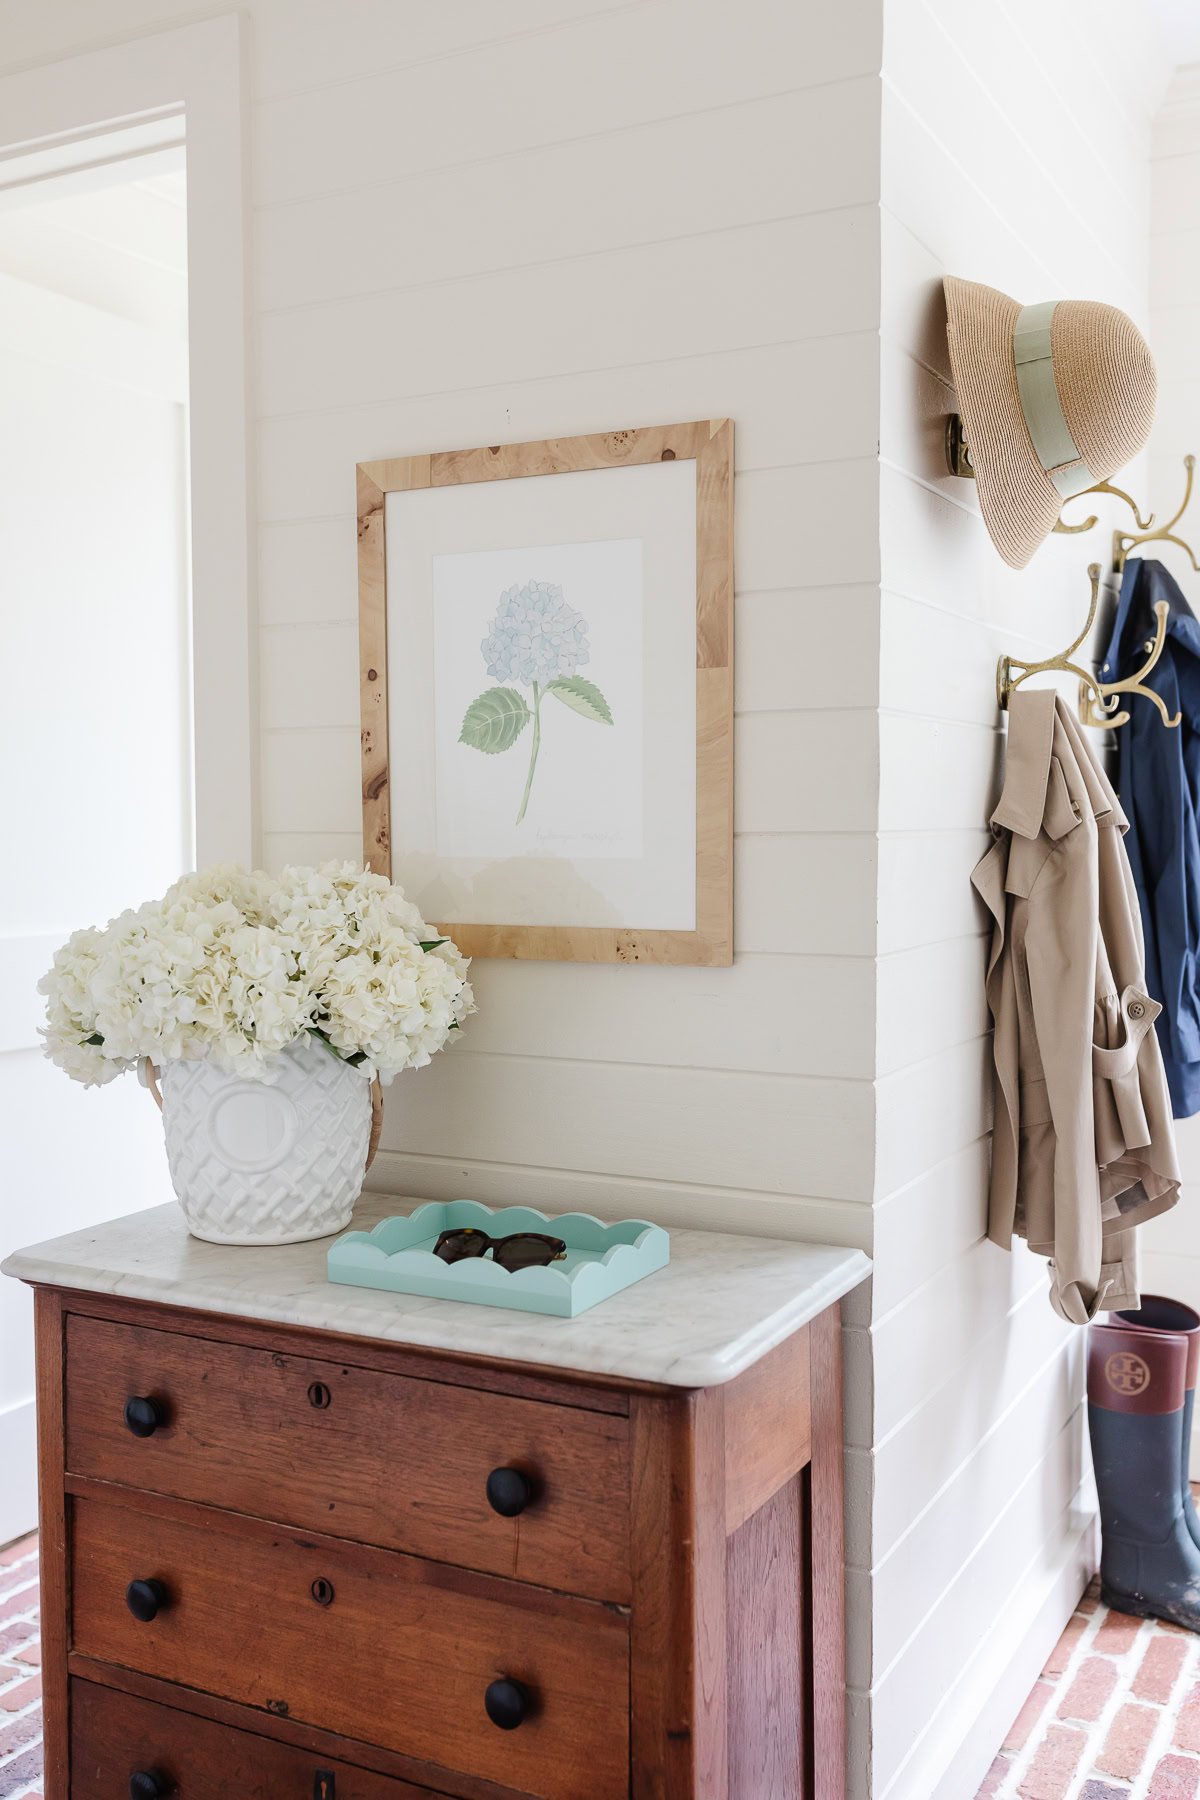 A wooden dresser with a white marble top holds a vase of flowers. Above it hangs a framed floral print on walls painted in a Benjamin Moore white color. On the wall are hanging coats, a hat, and rain boots. A light turquoise tray sits on the dresser.